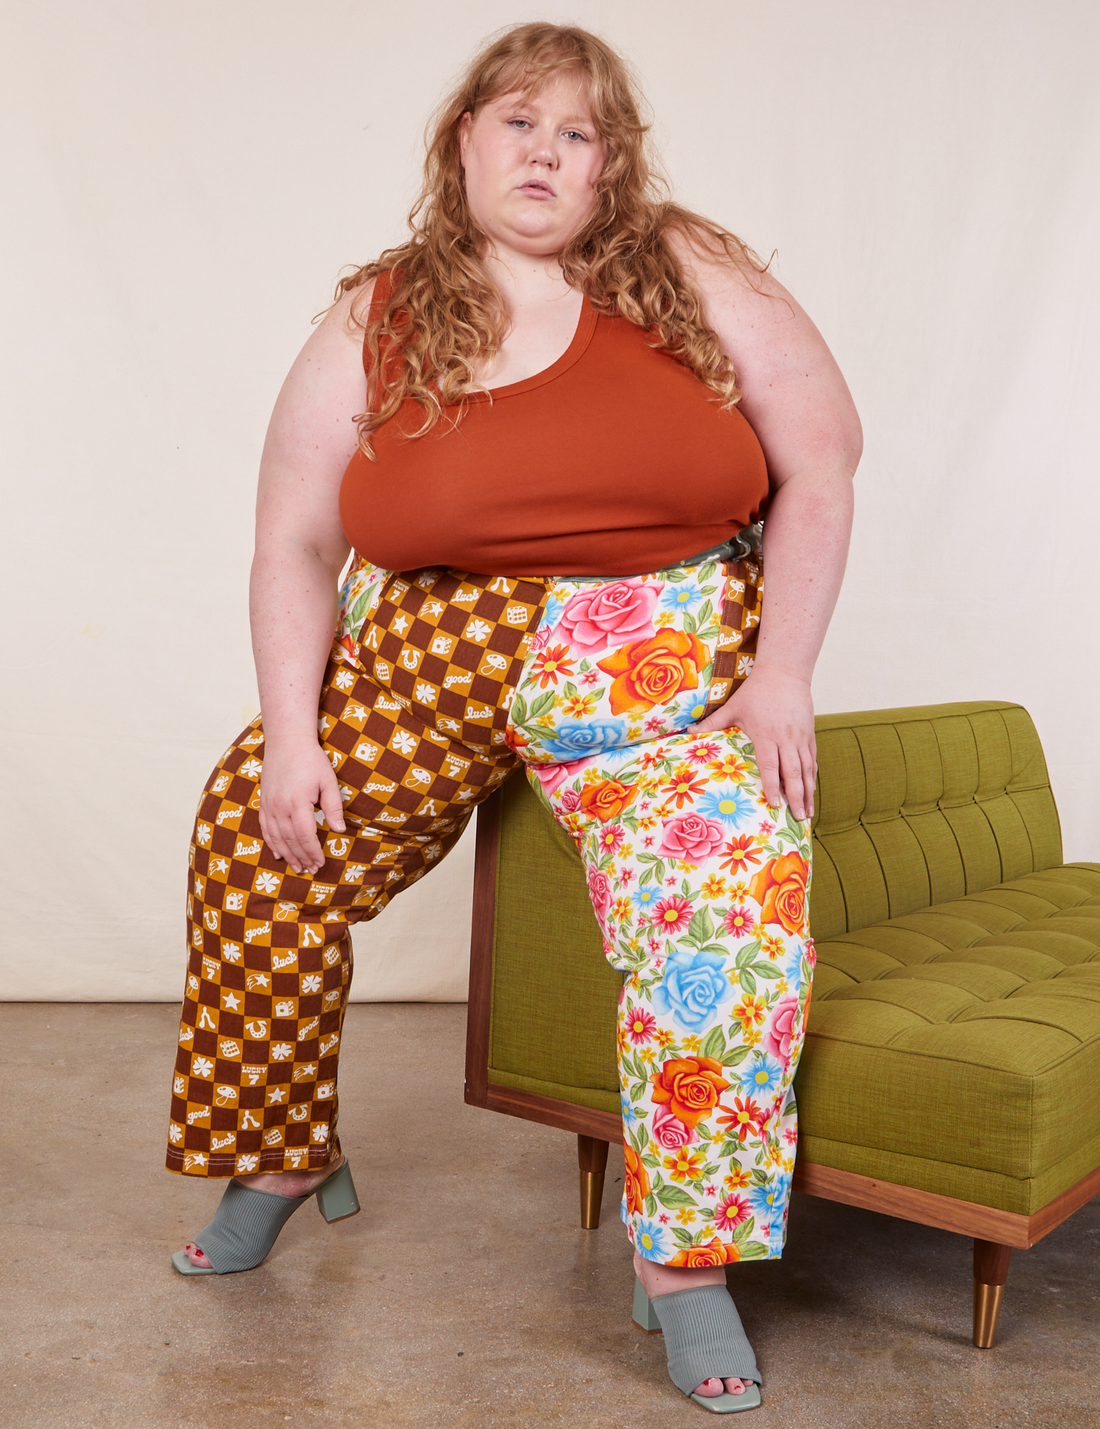 Catie is wearing Mismatched Print Work Pants and burnt terracotta Tank Top